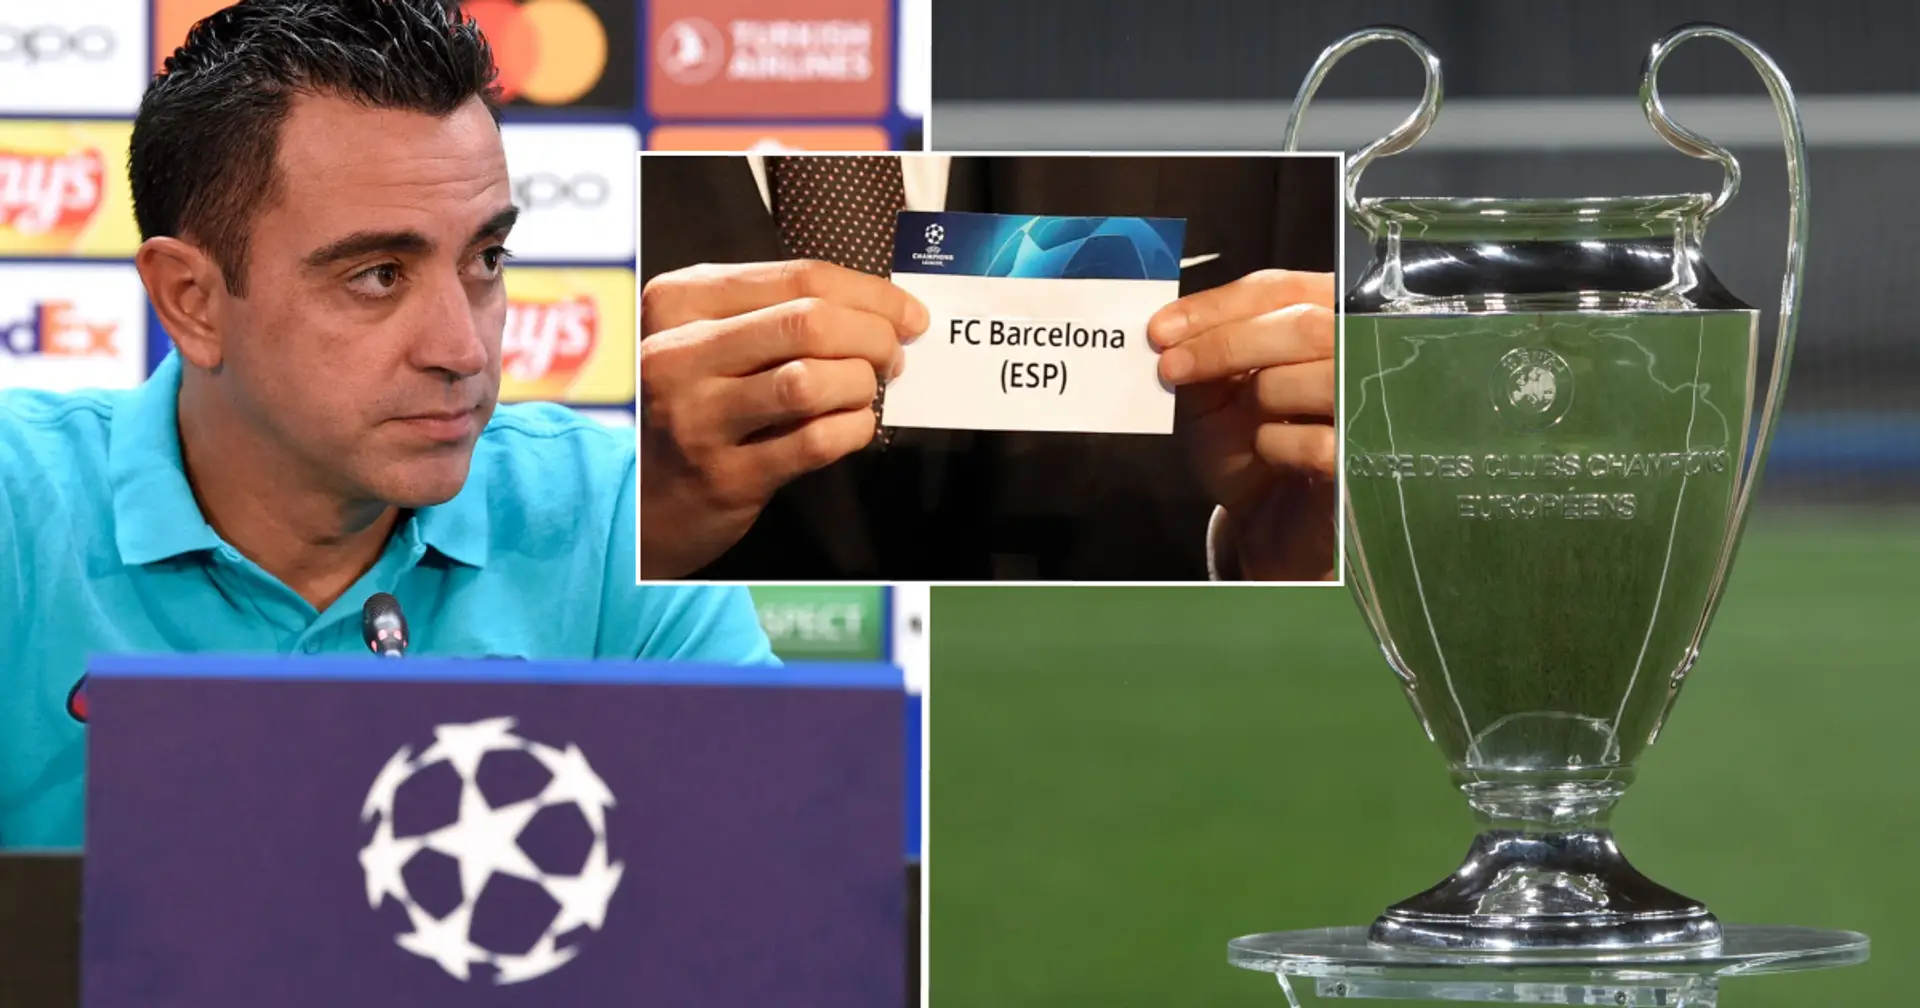 Barca's potential Champions League group stage opponents revealed amid final playoff games